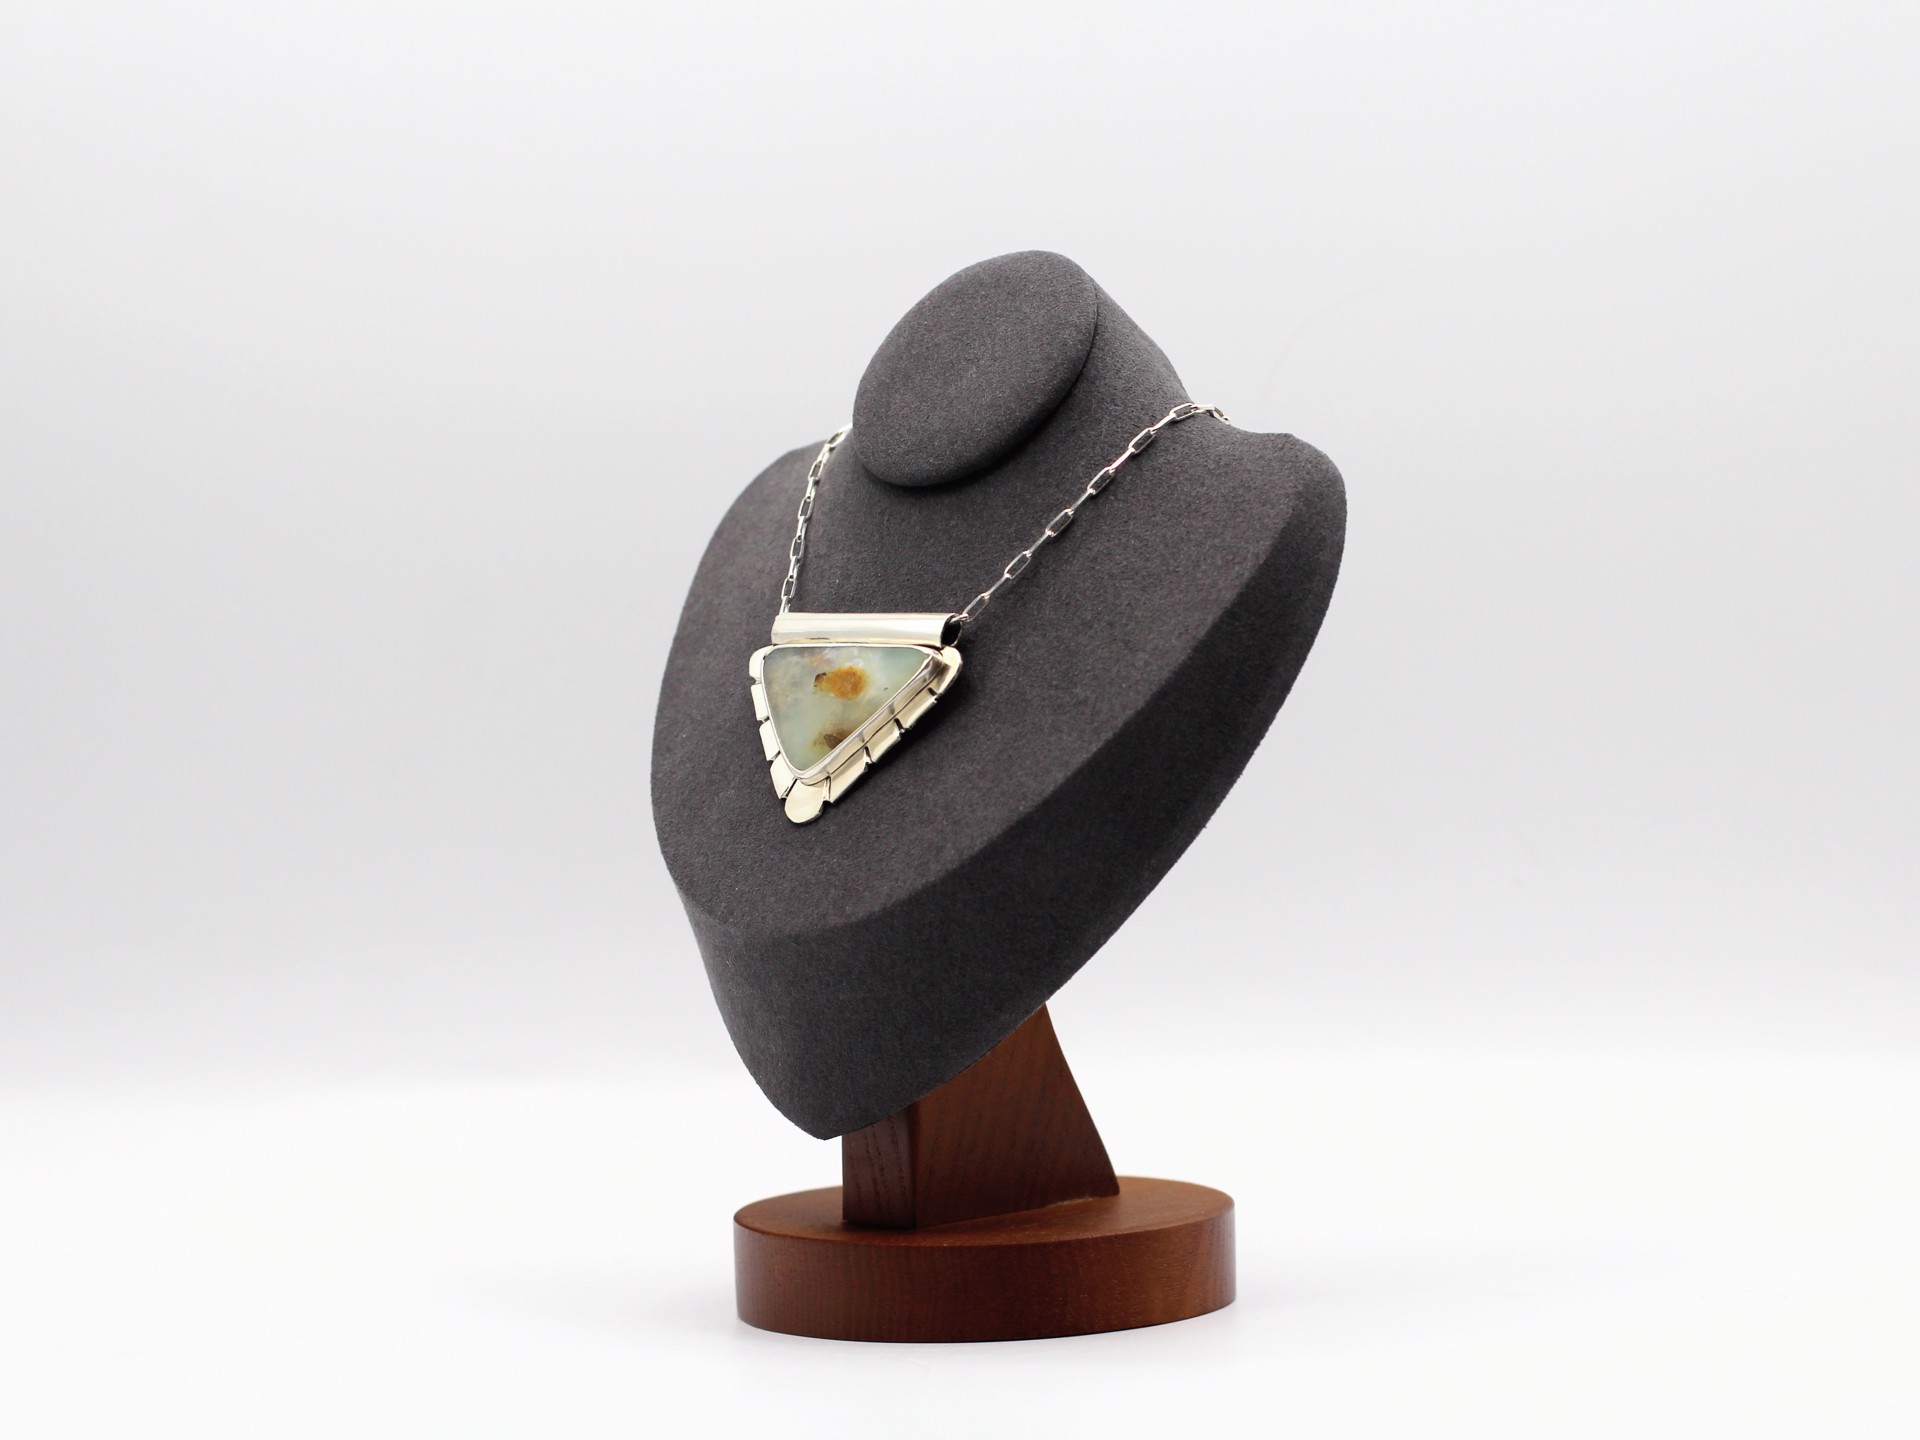 Islands Necklace by Sadee Crum